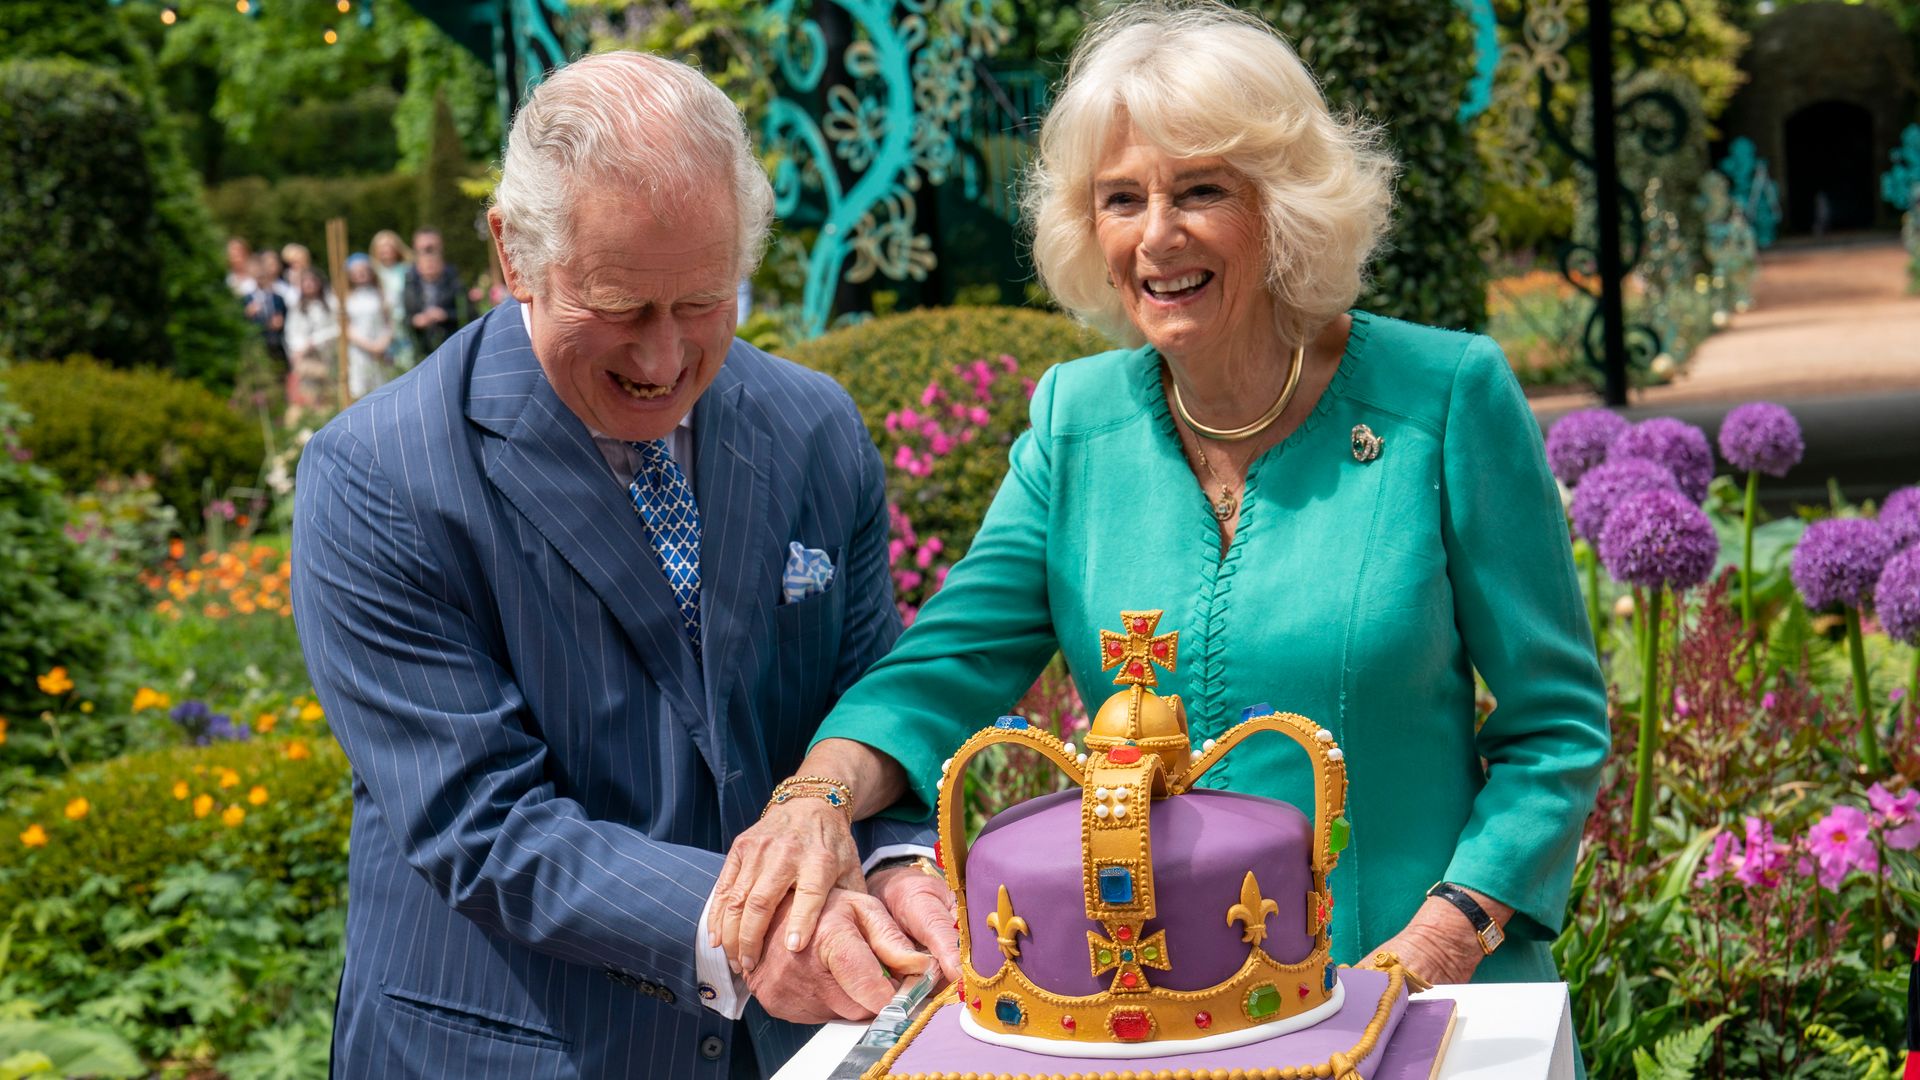 King Charles III and Queen Camilla cut a cake during a visit to open the new Coronation Garden on day one of their two-day visit to Northern Ireland on May 24, 2023 in Newtownabbey, Northern Ireland. 